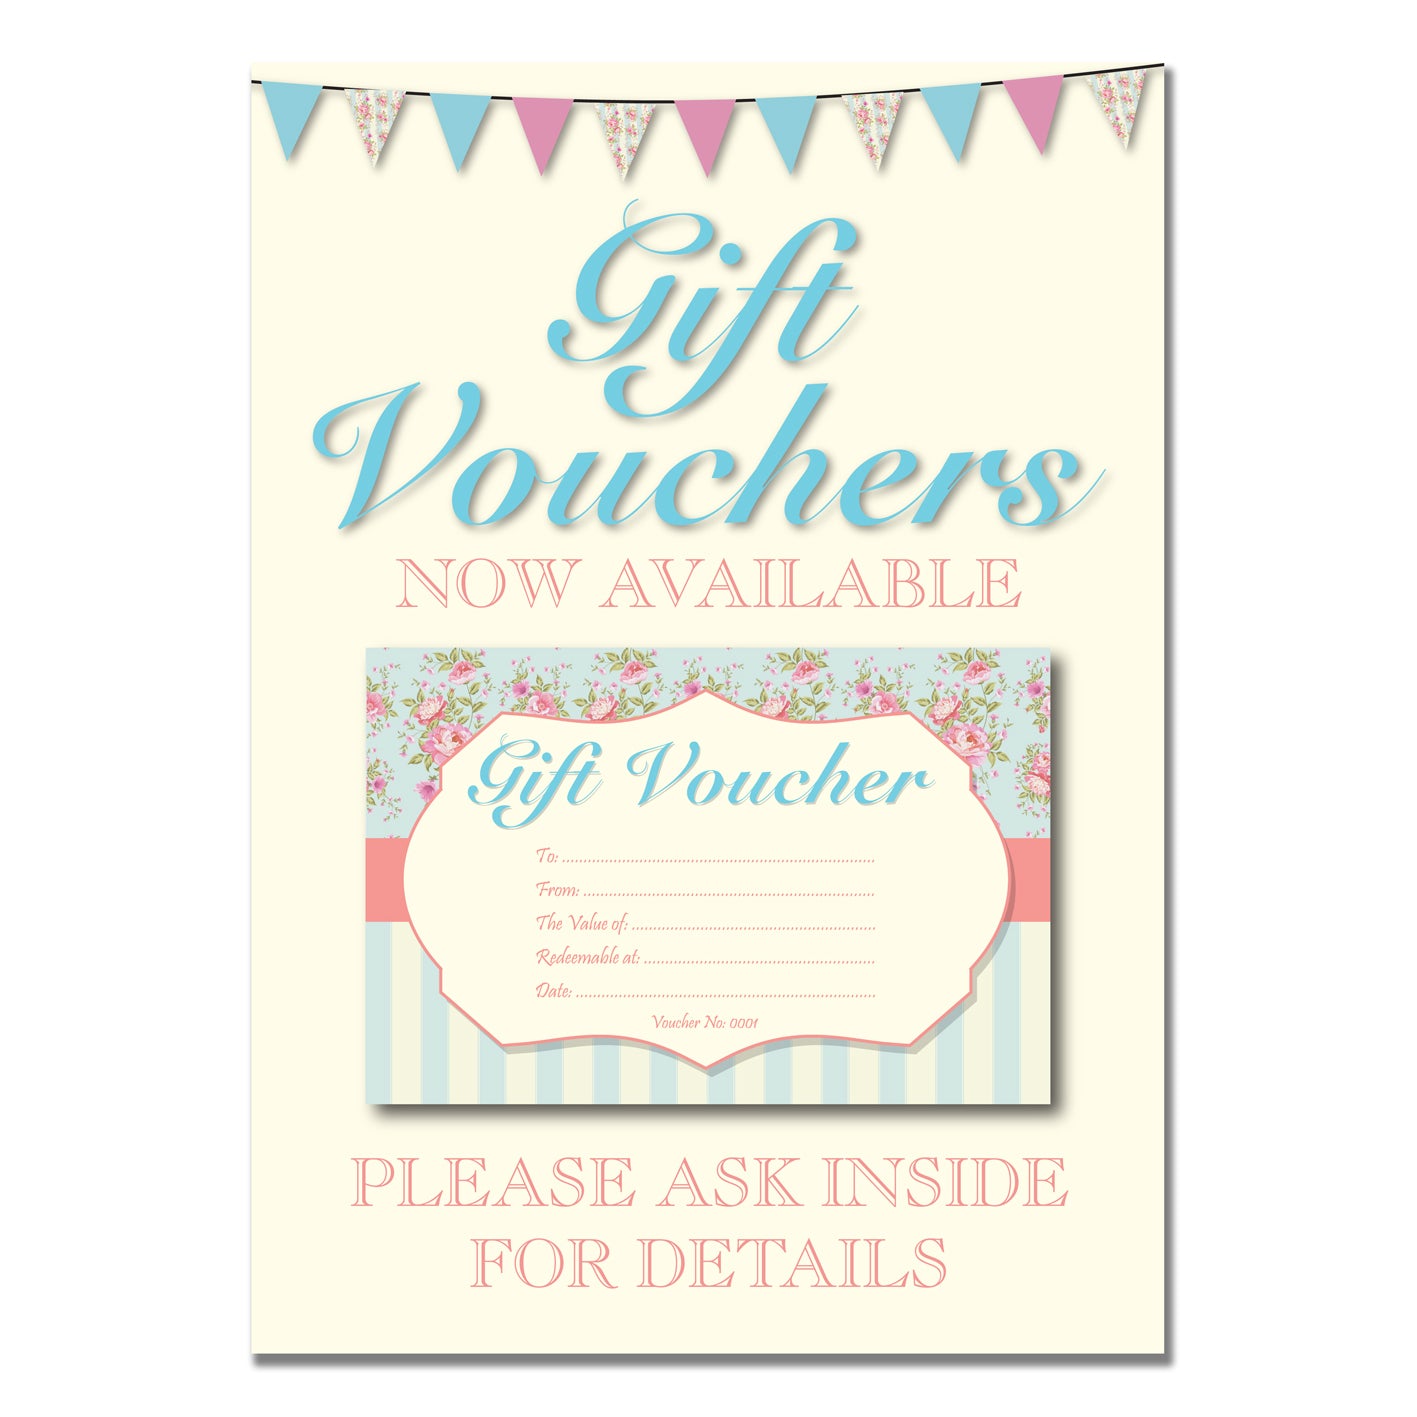 Shabby Chic/Floral Gift Voucher Book 99mm x 210mm with FREE A4 POSTER